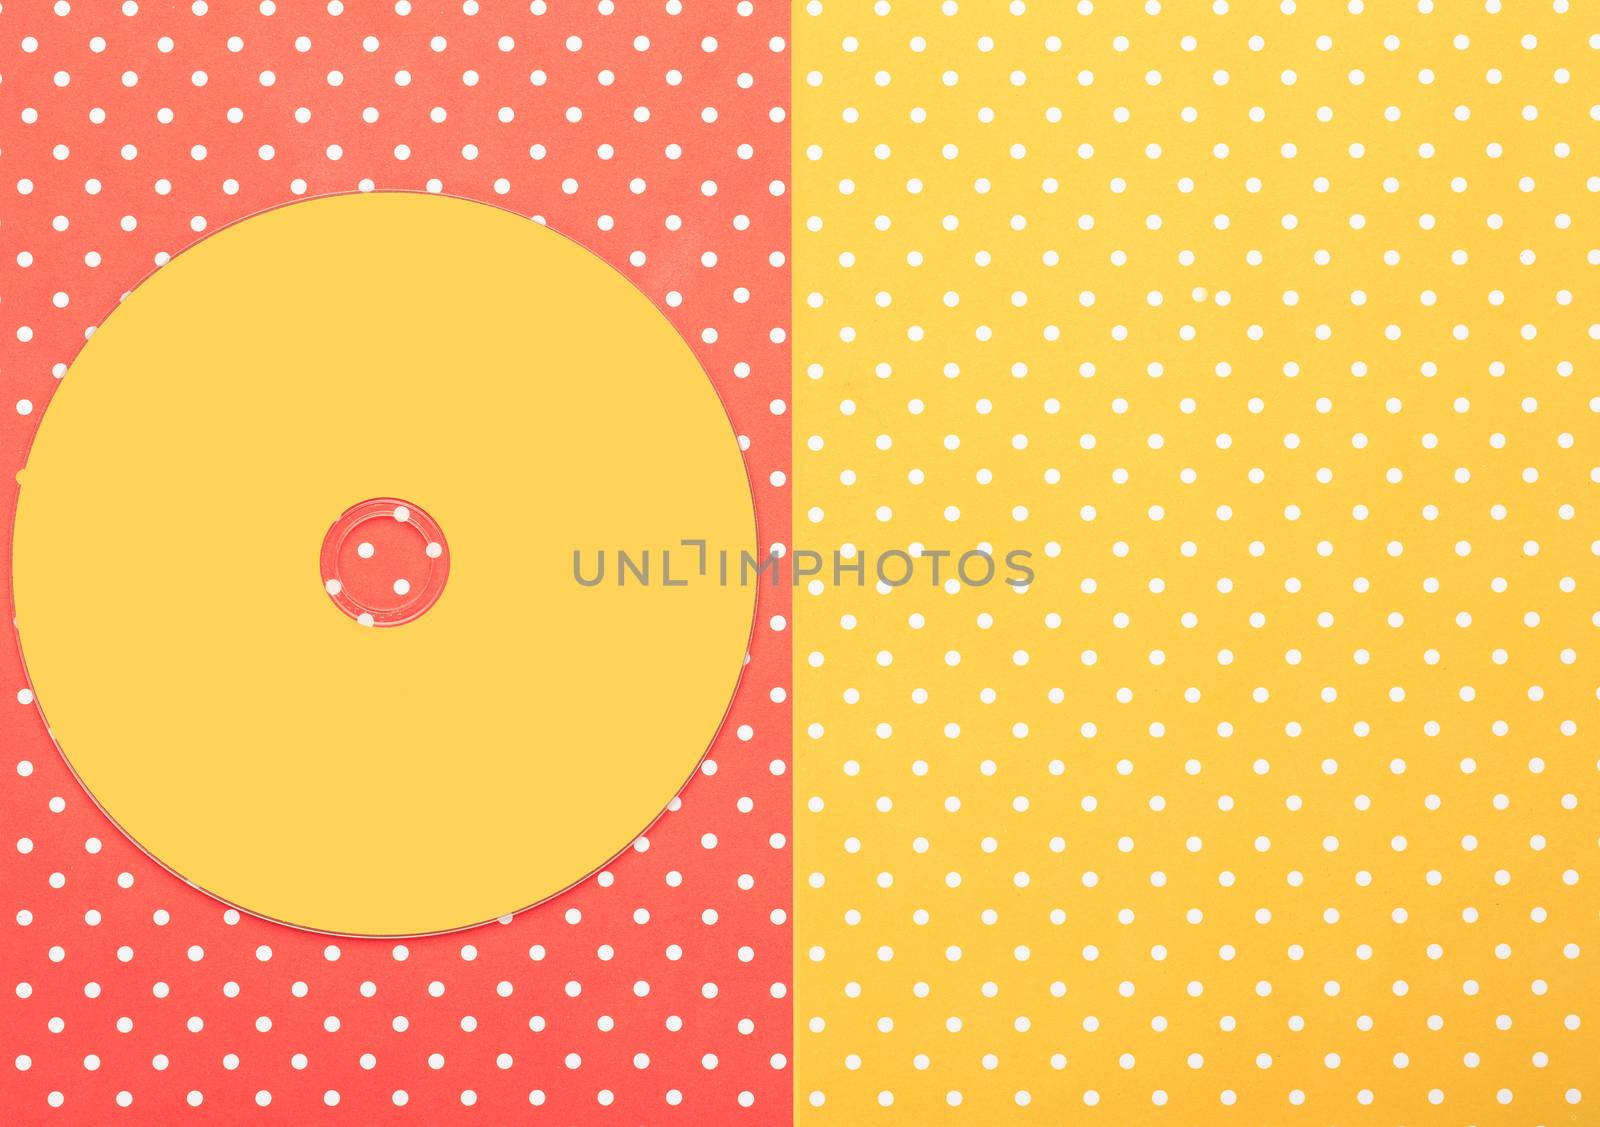 Compact disk CD  with colorful topped background